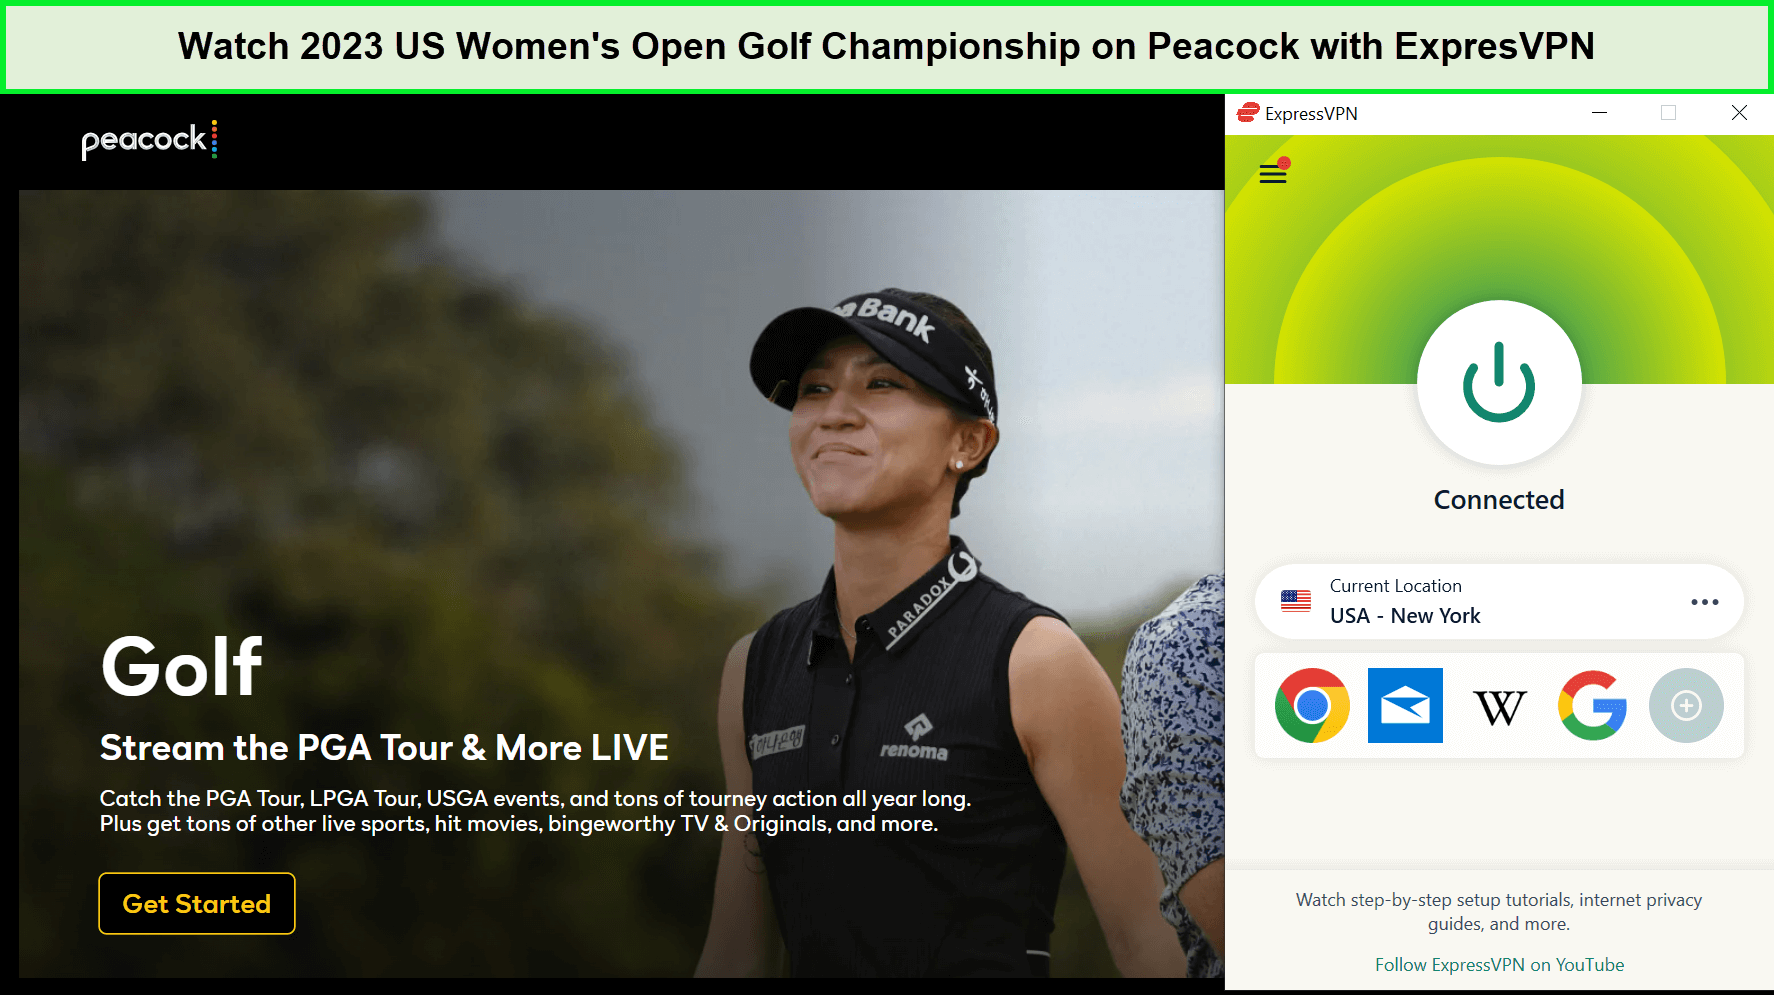 Watch-2023-US-Womens-Open-Golf-Championship-in-Australia-on-Peacock-with-ExpresVPN